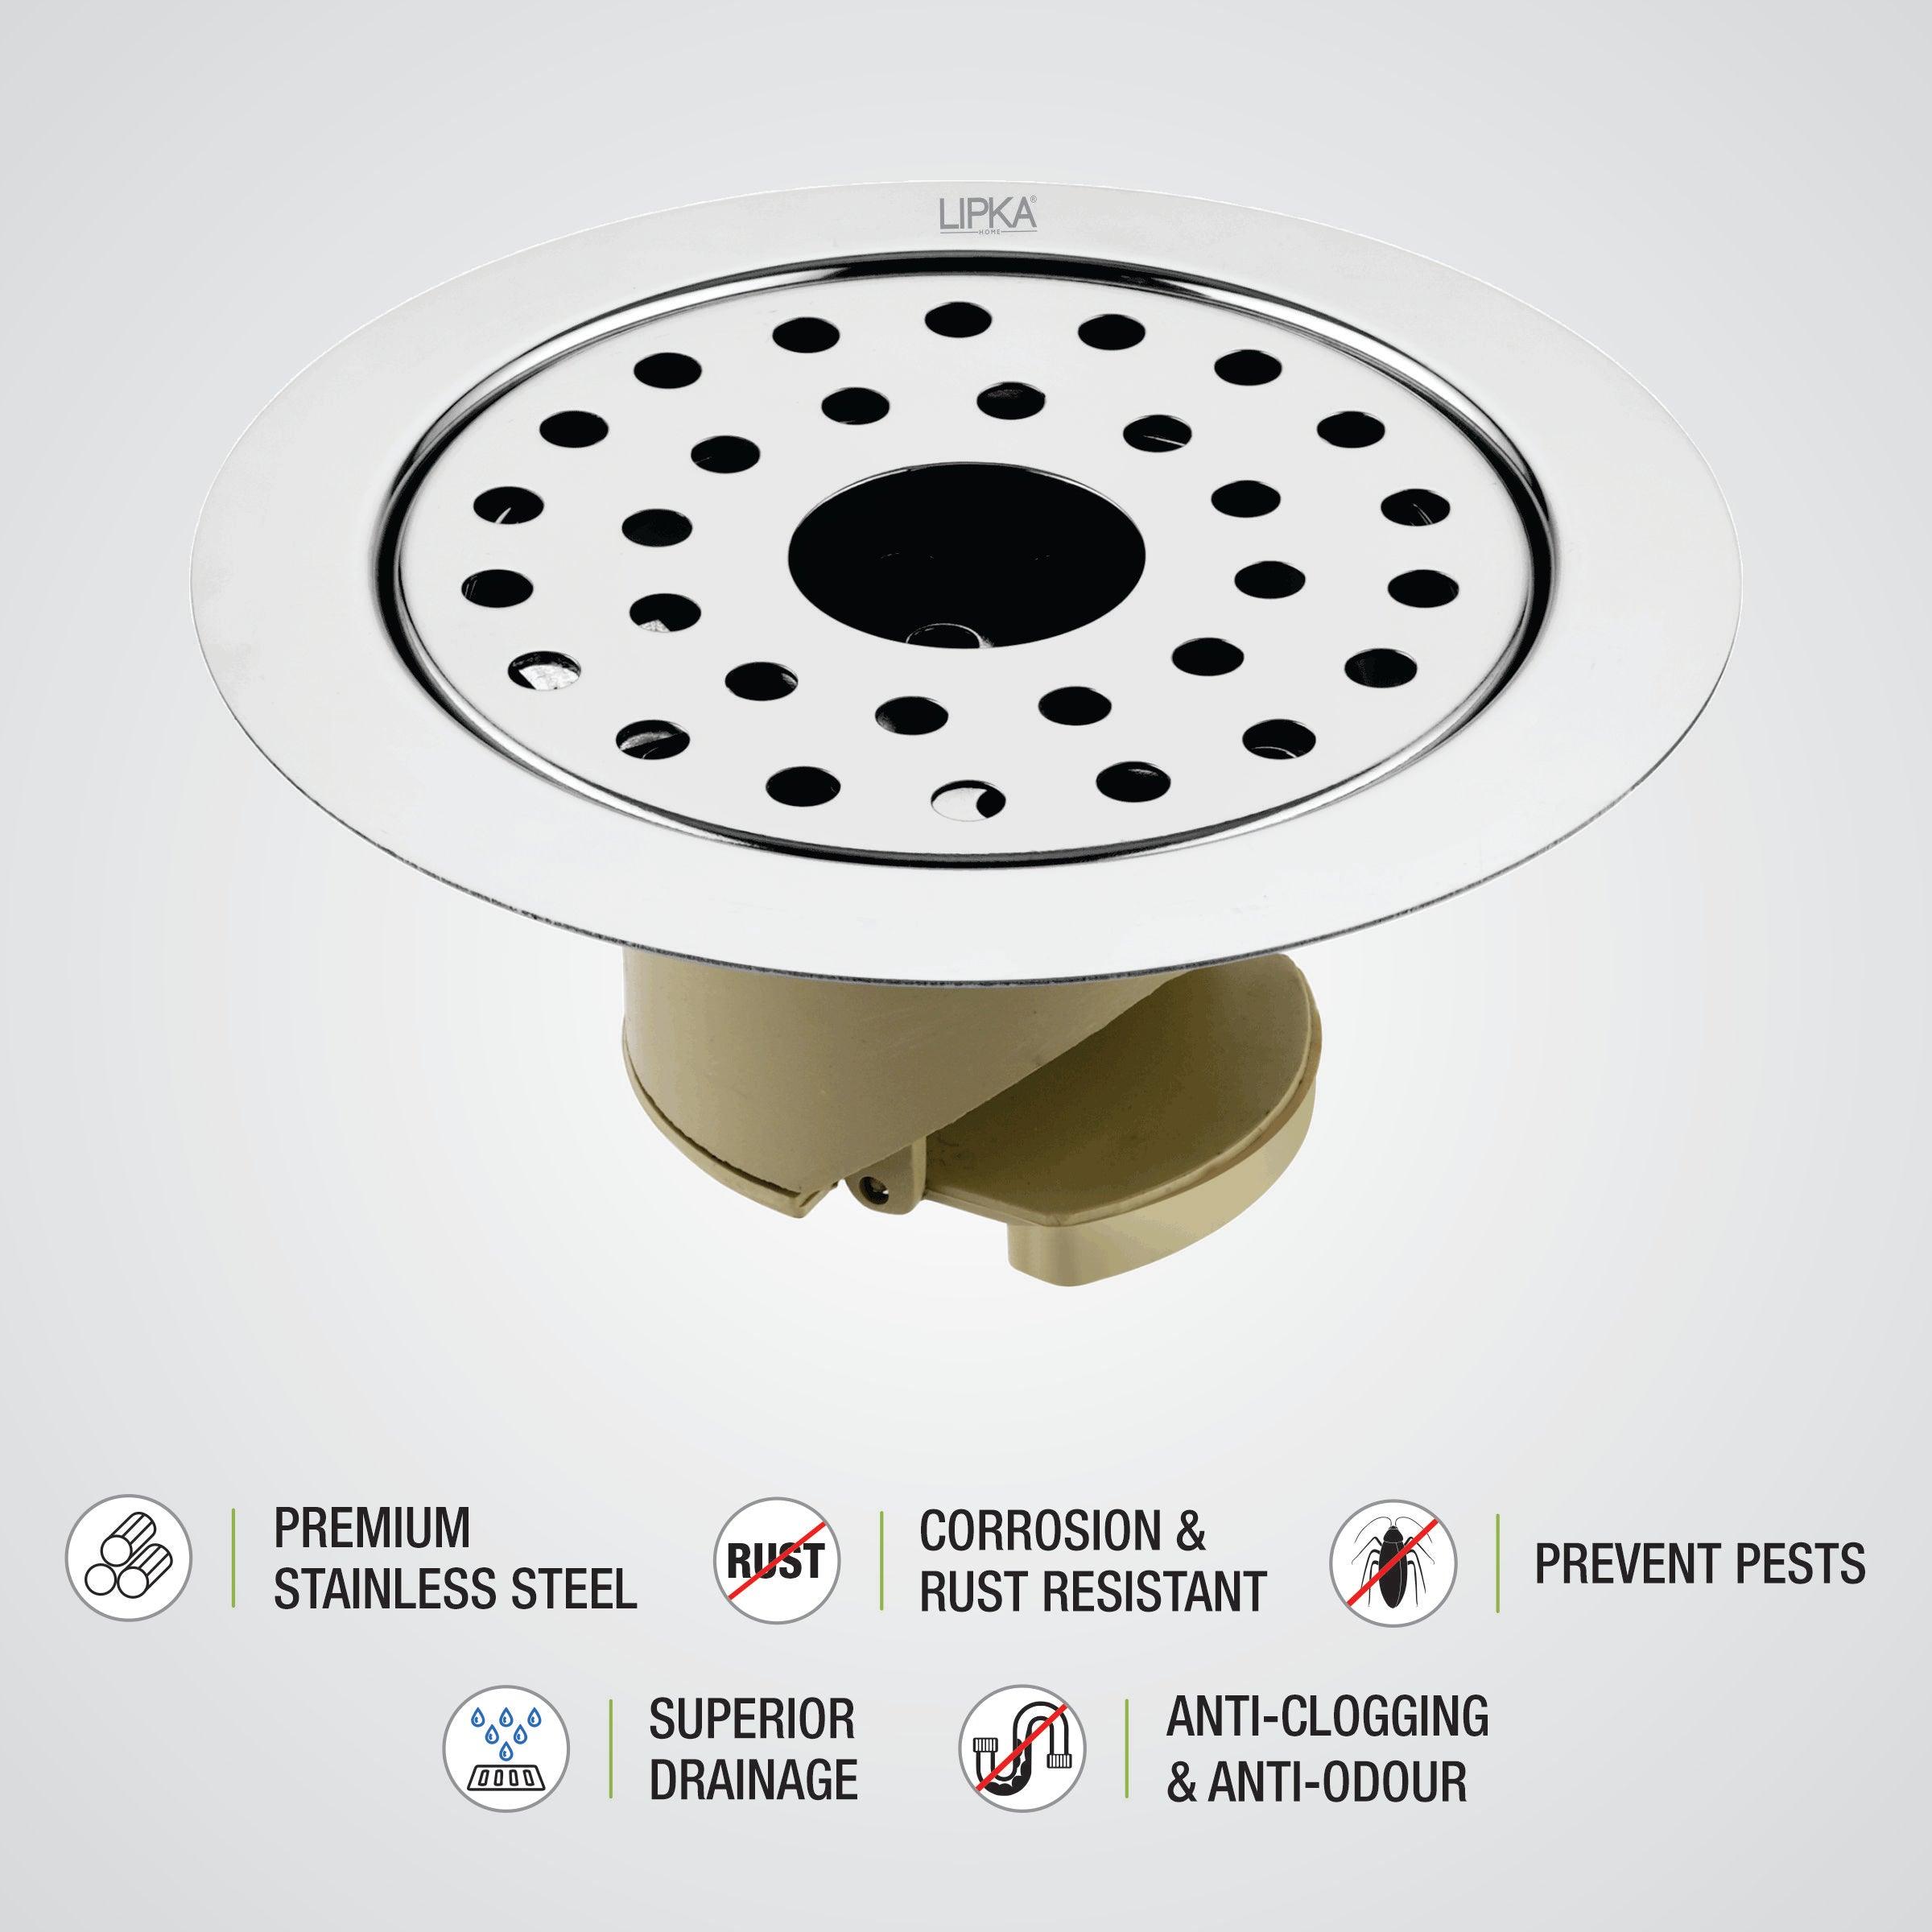 Round Jal Floor Drain (5 Inches) with Hole and Wide PVC Cockroach Trap features